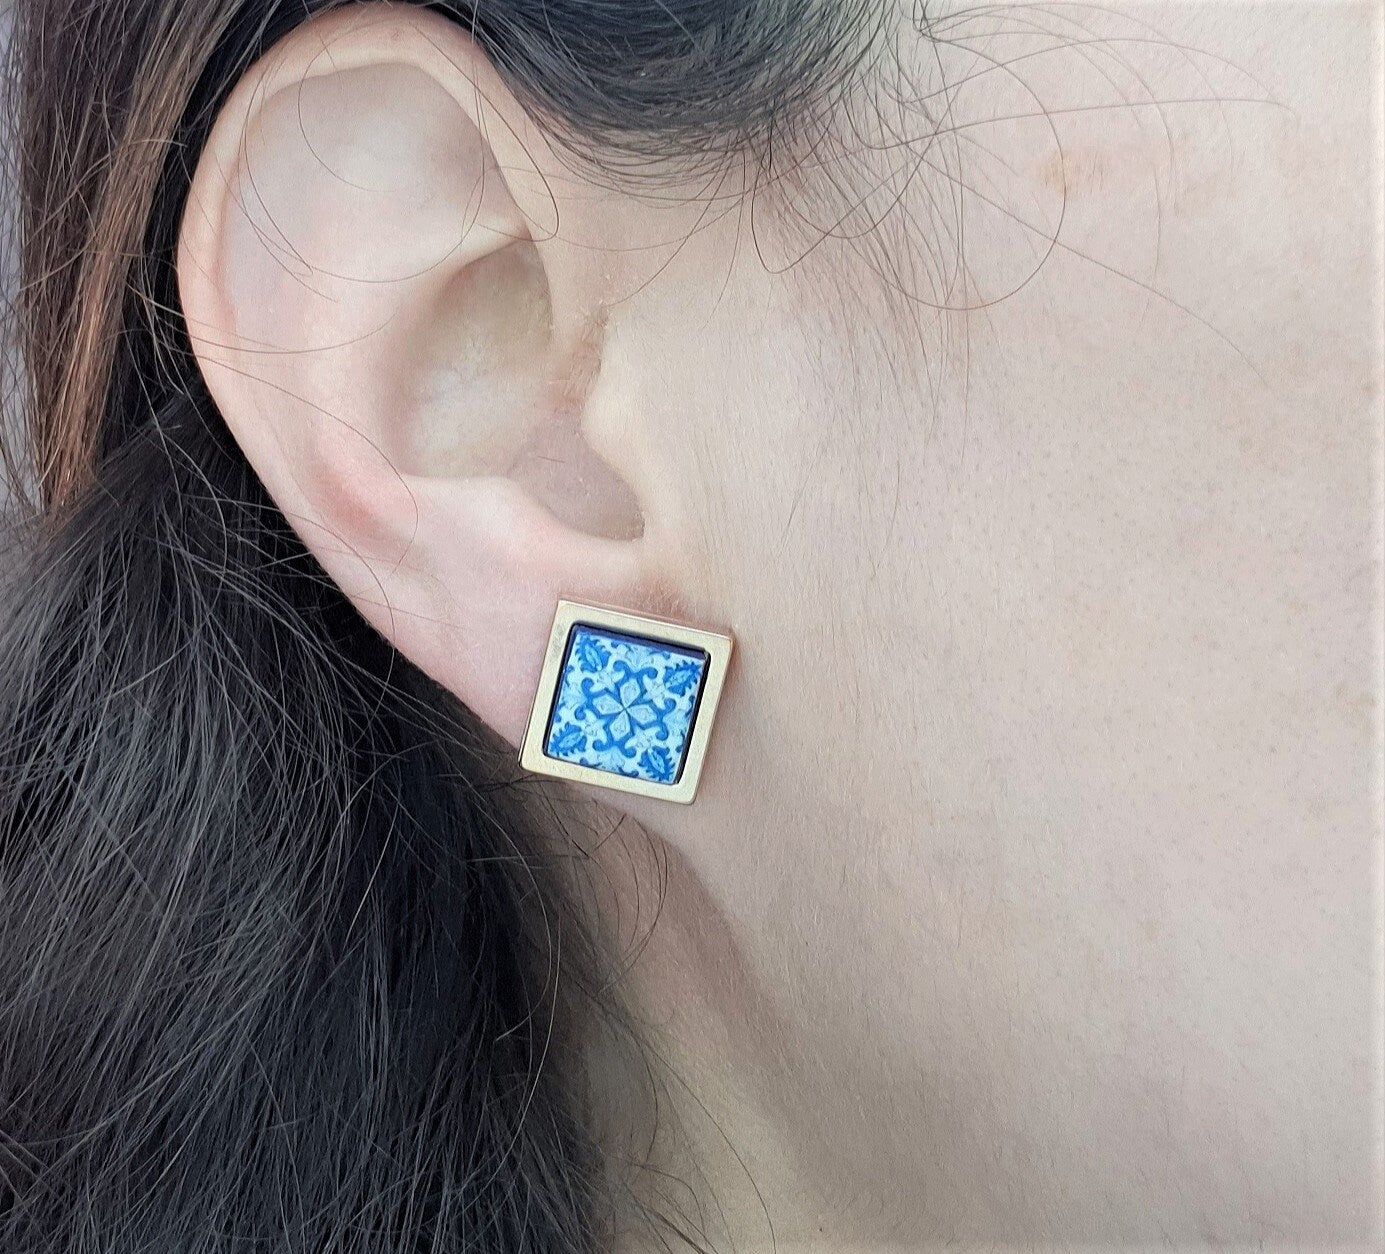 GOLD BLUE Tile Stud Earring Portugal Stainless STEEL Azulejo Minimalist Delicate Stud Earring Historical Jewelry Anniversary Gift for Her